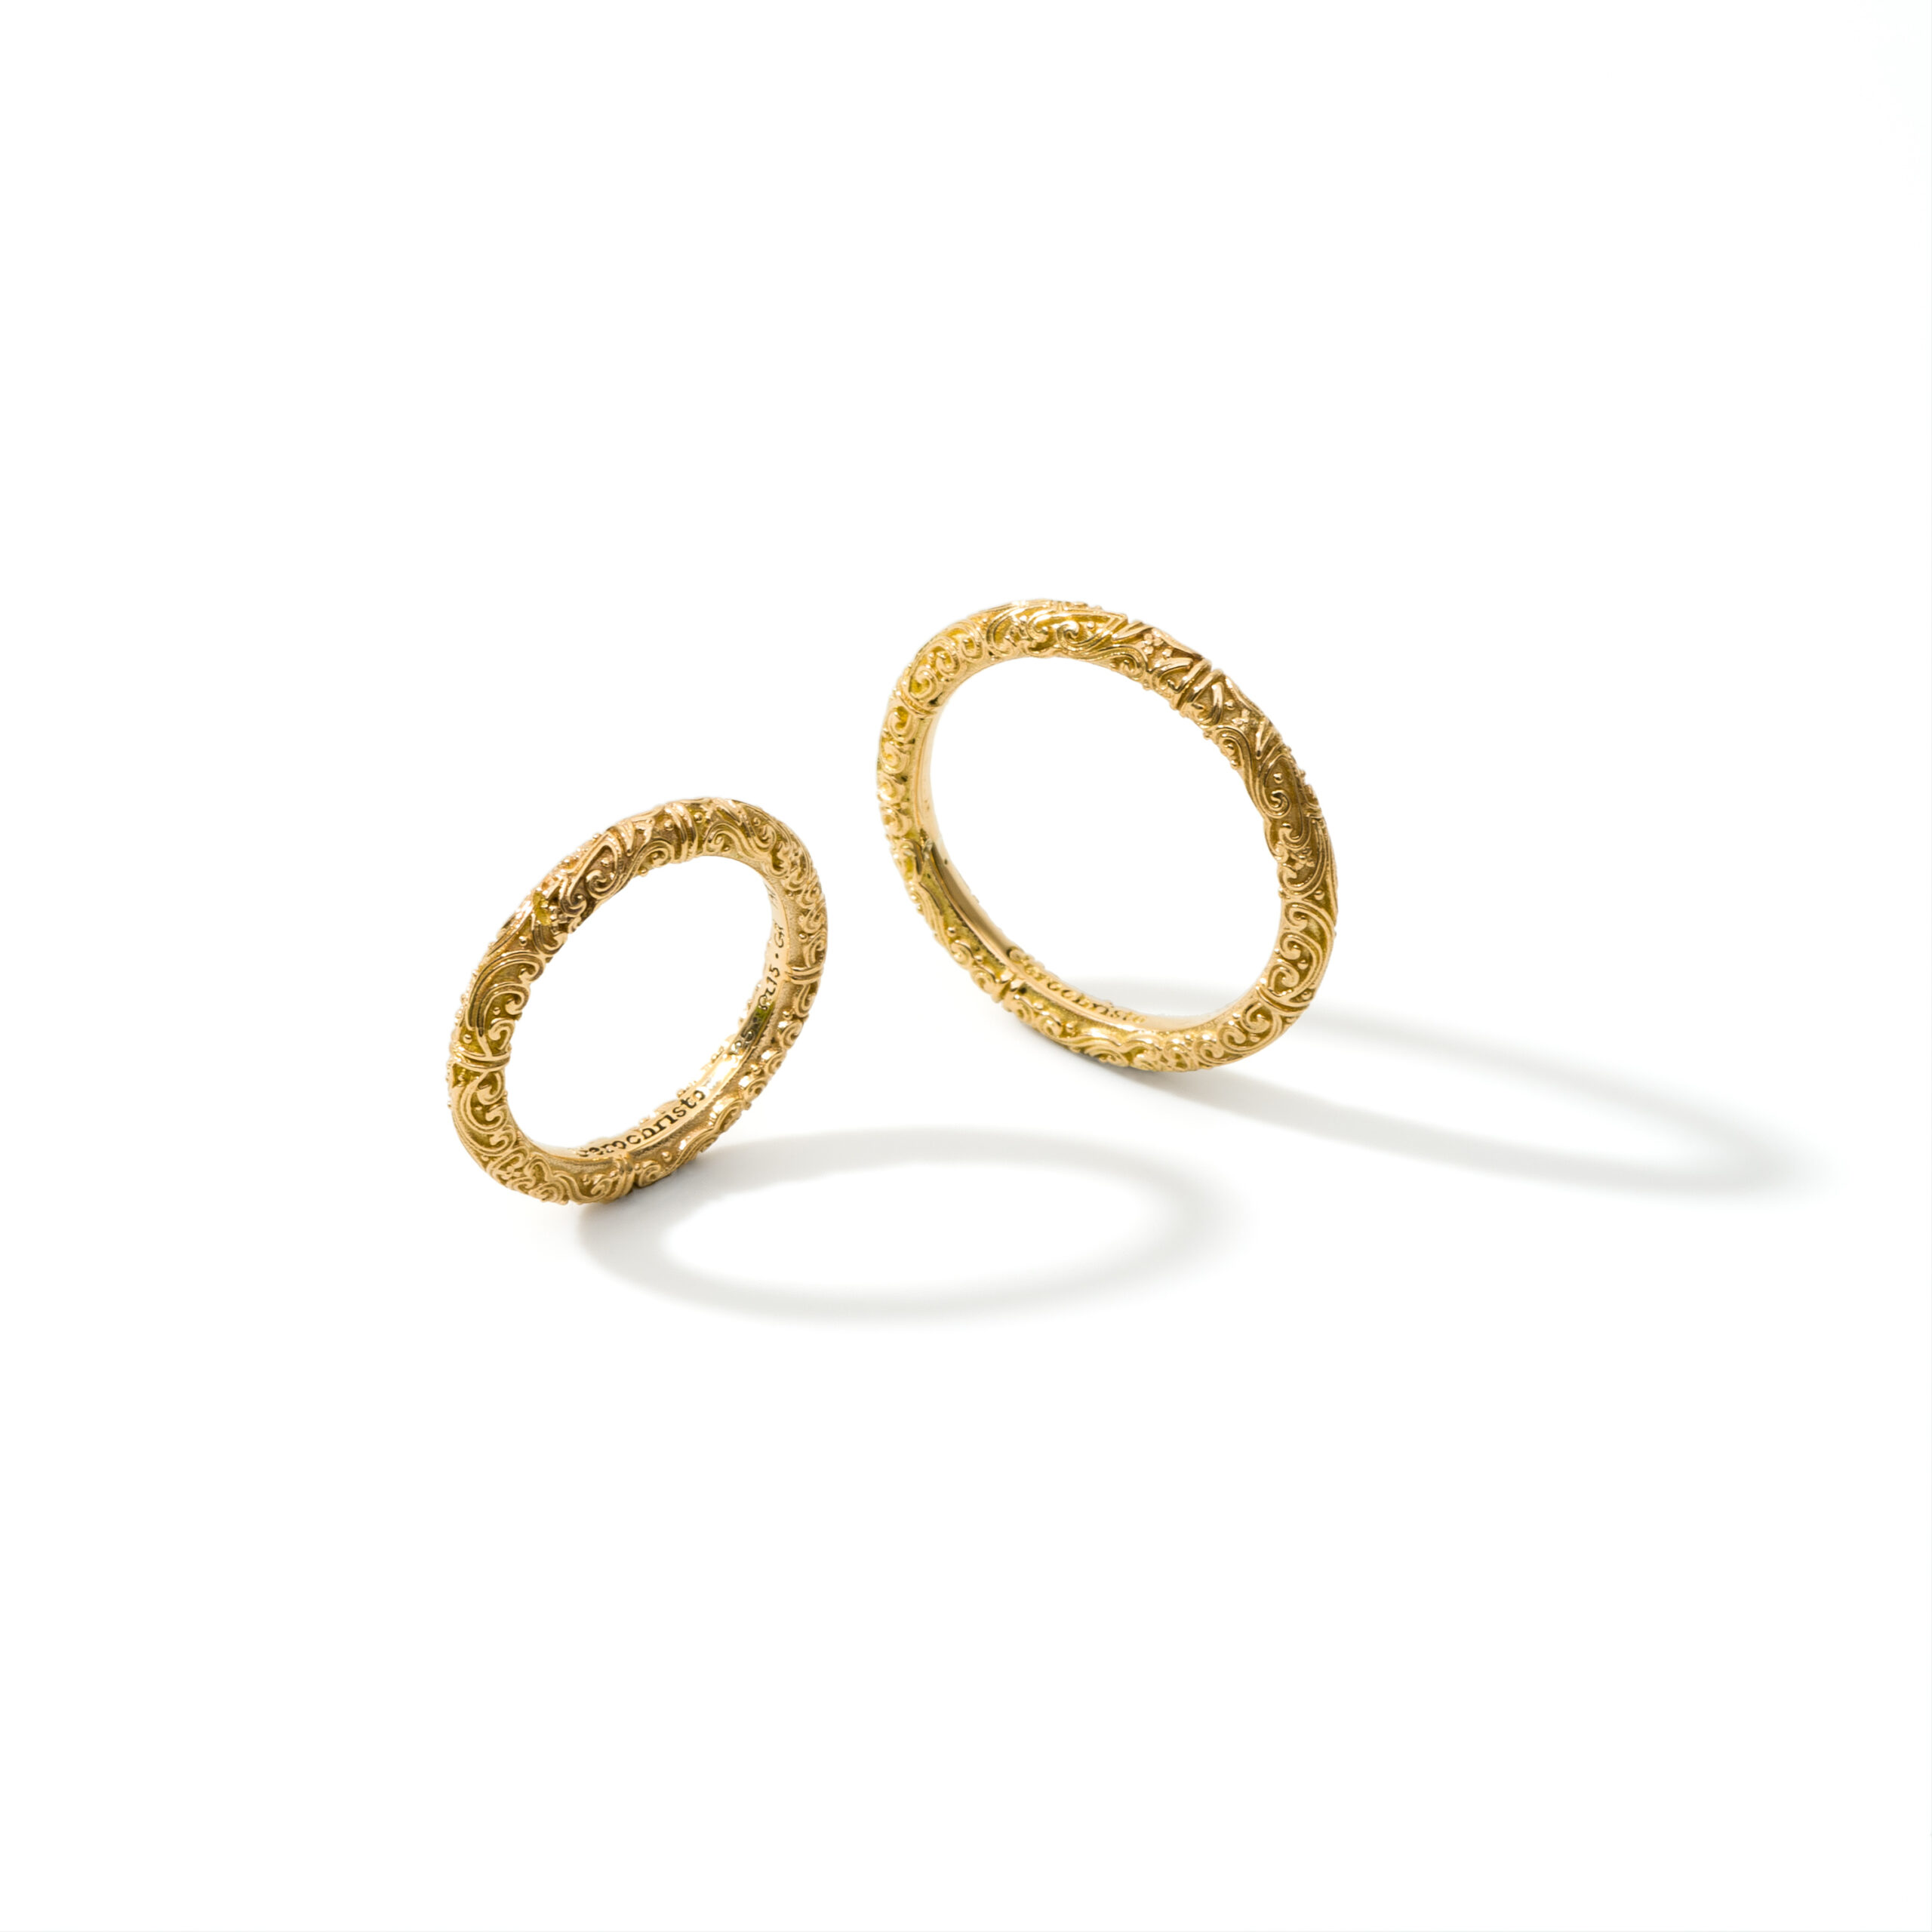 Eden's Garden Band Ring in 18K Solid Yellow Gold